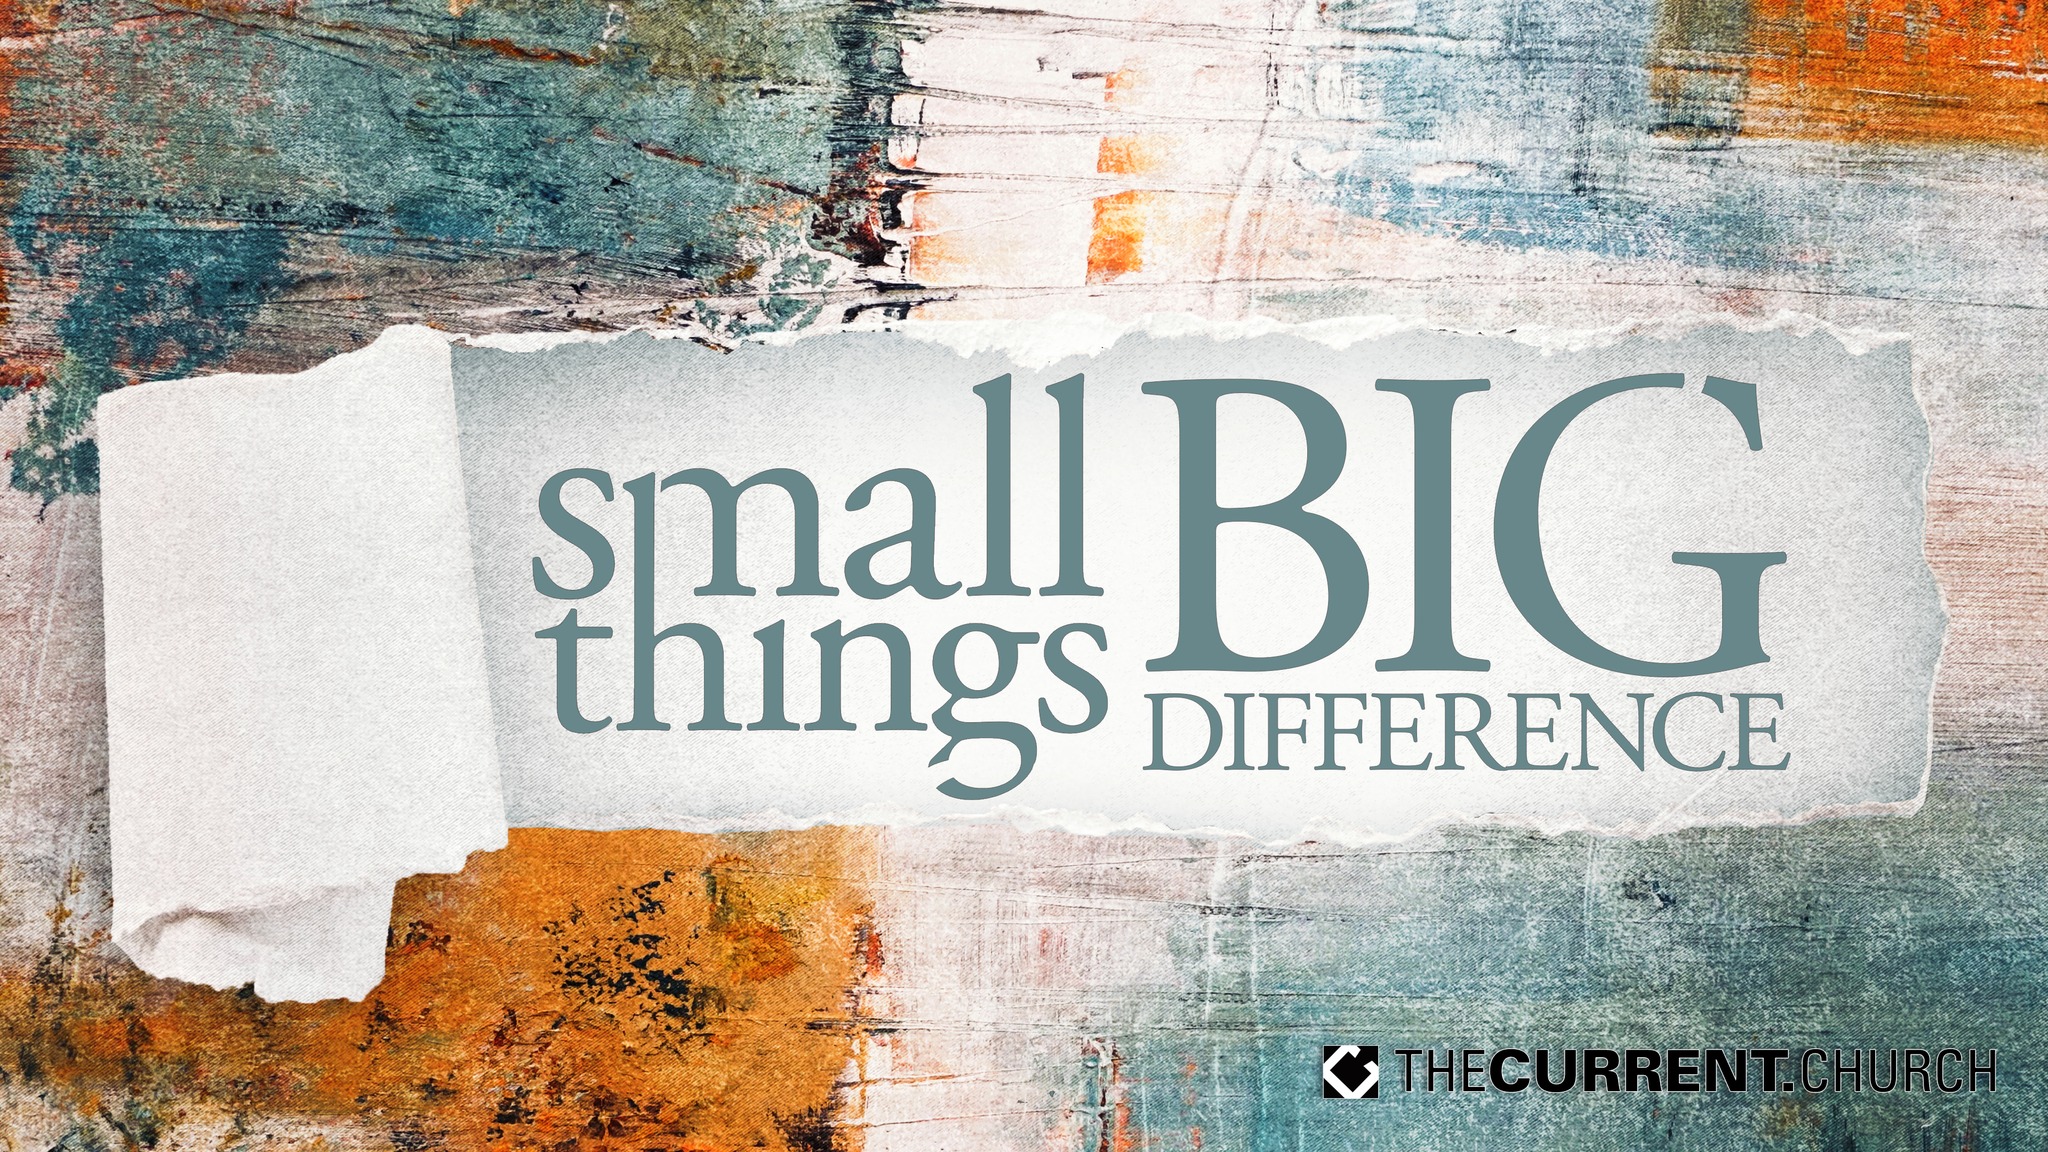 Small Things Big Difference